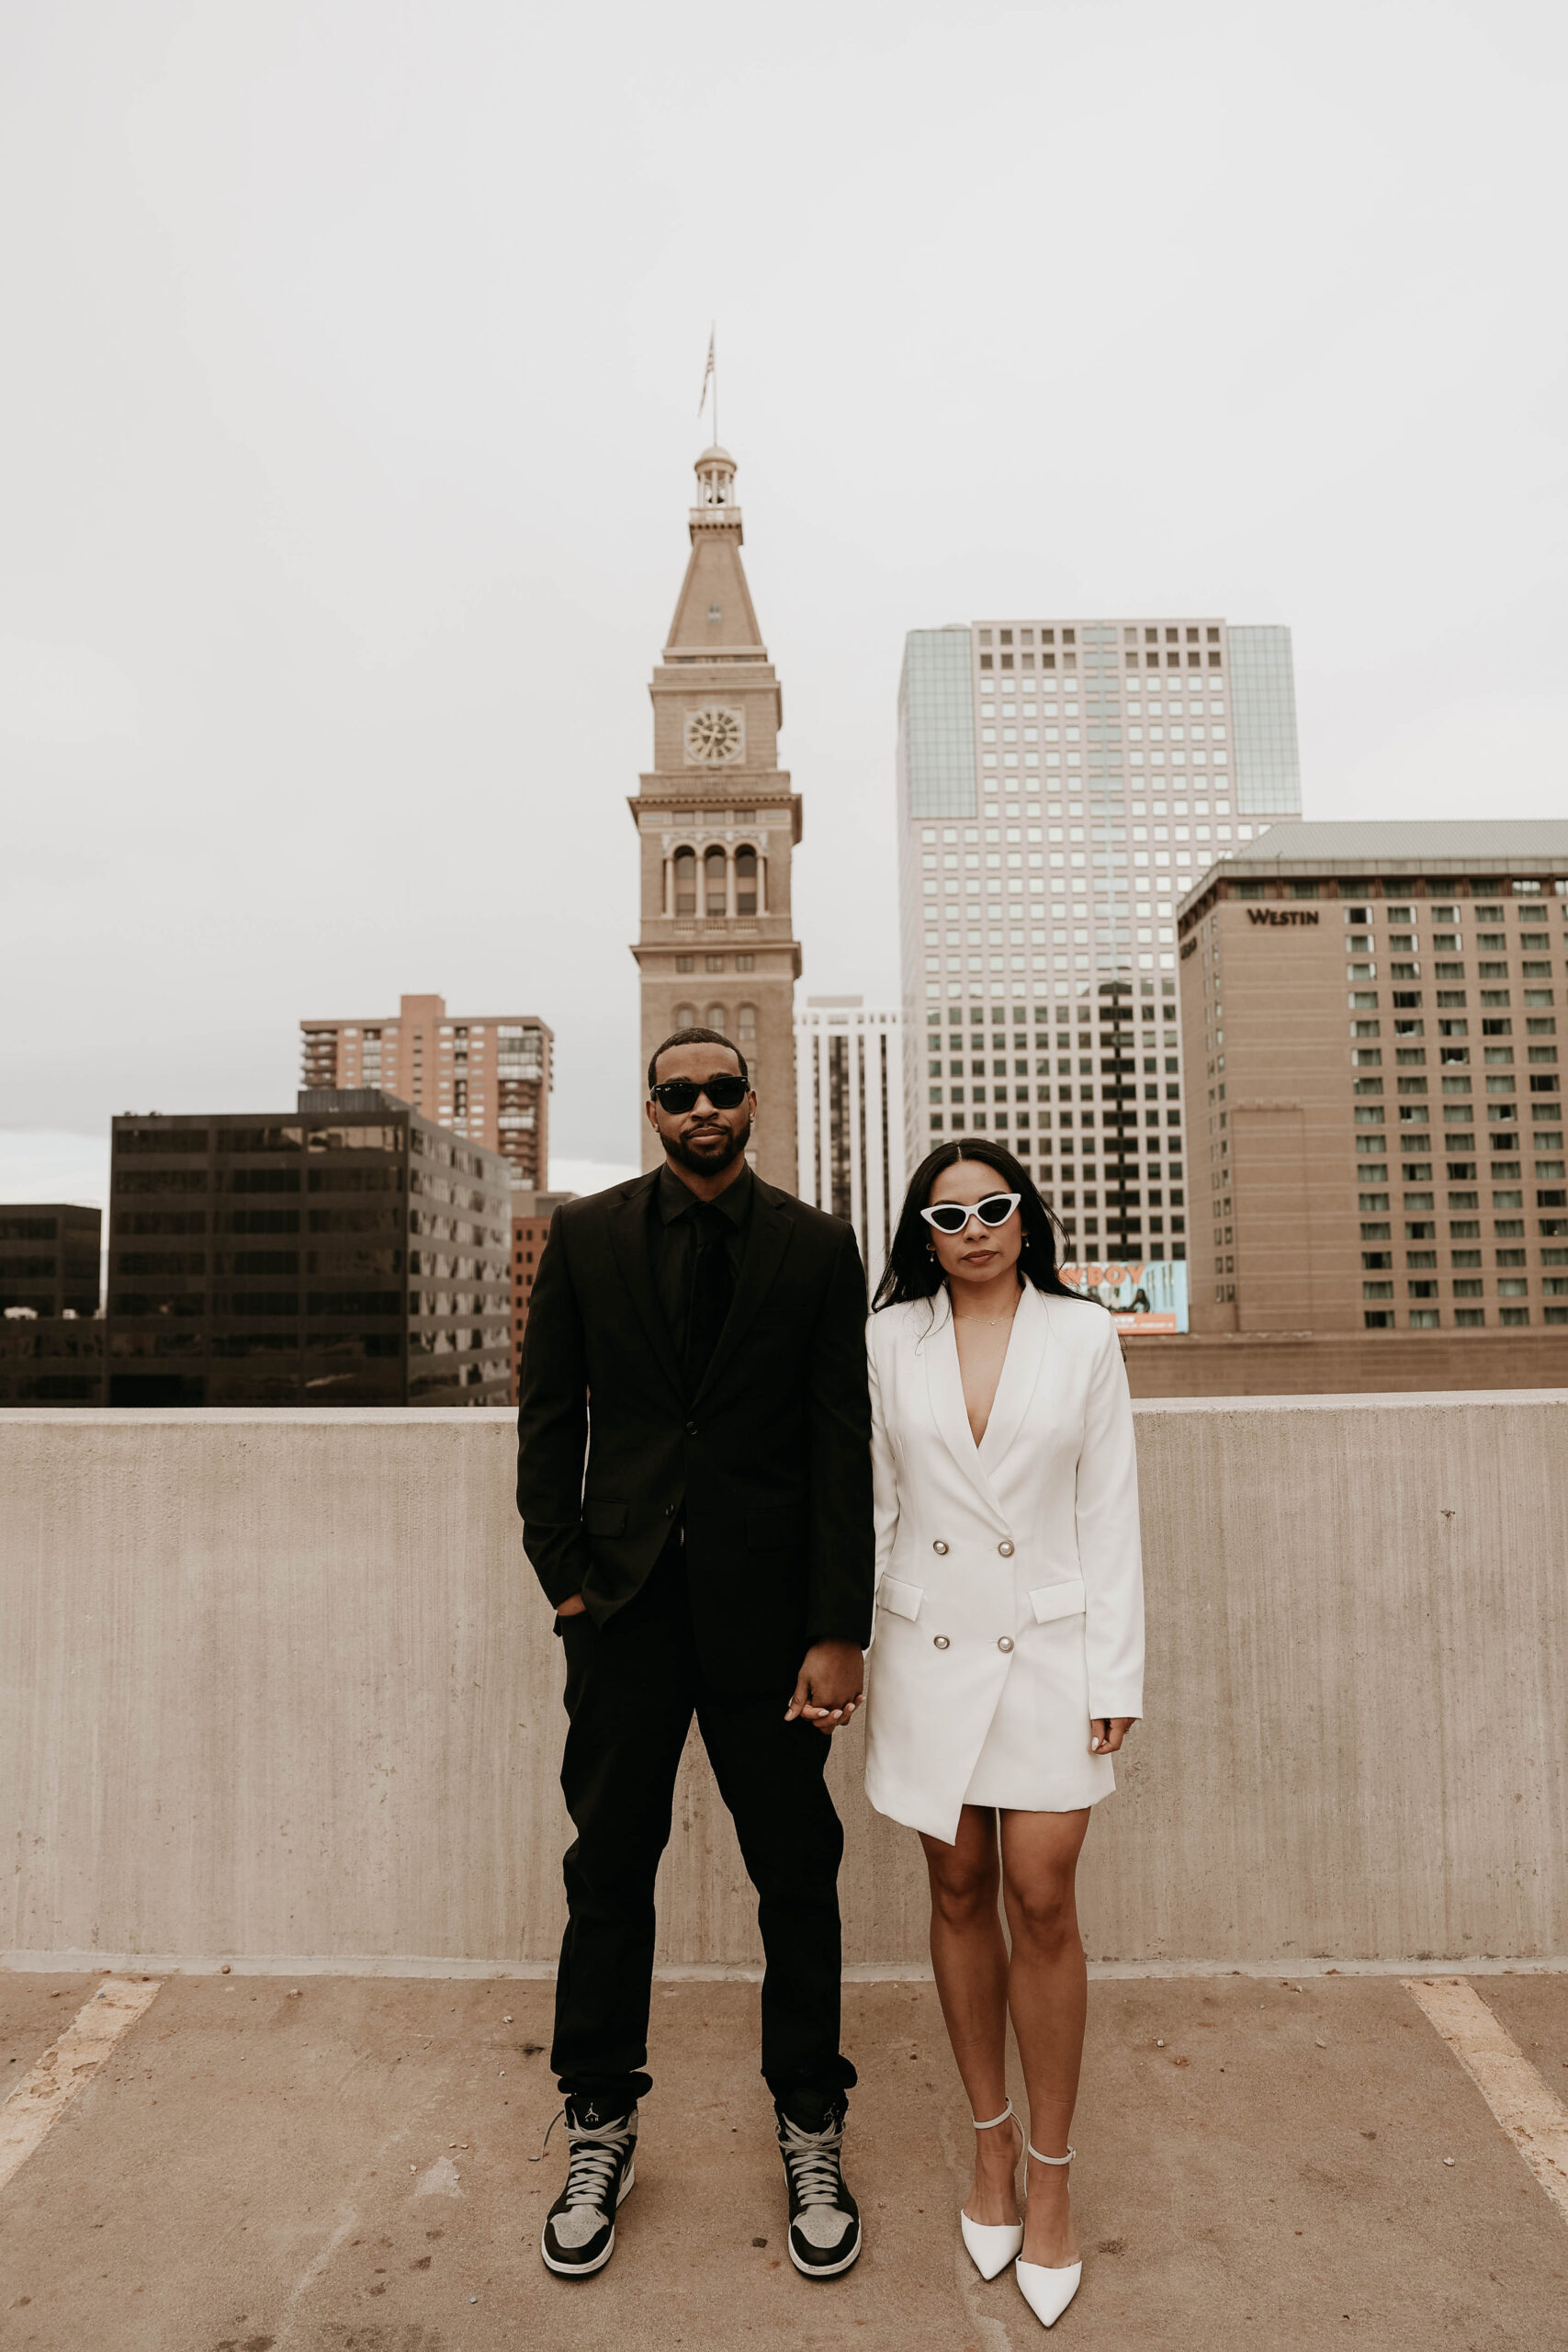 a newly engaged couple during a unique engagement shoot idea on a rooftop in Denver holding hands in formal attire wearing sunglasses 